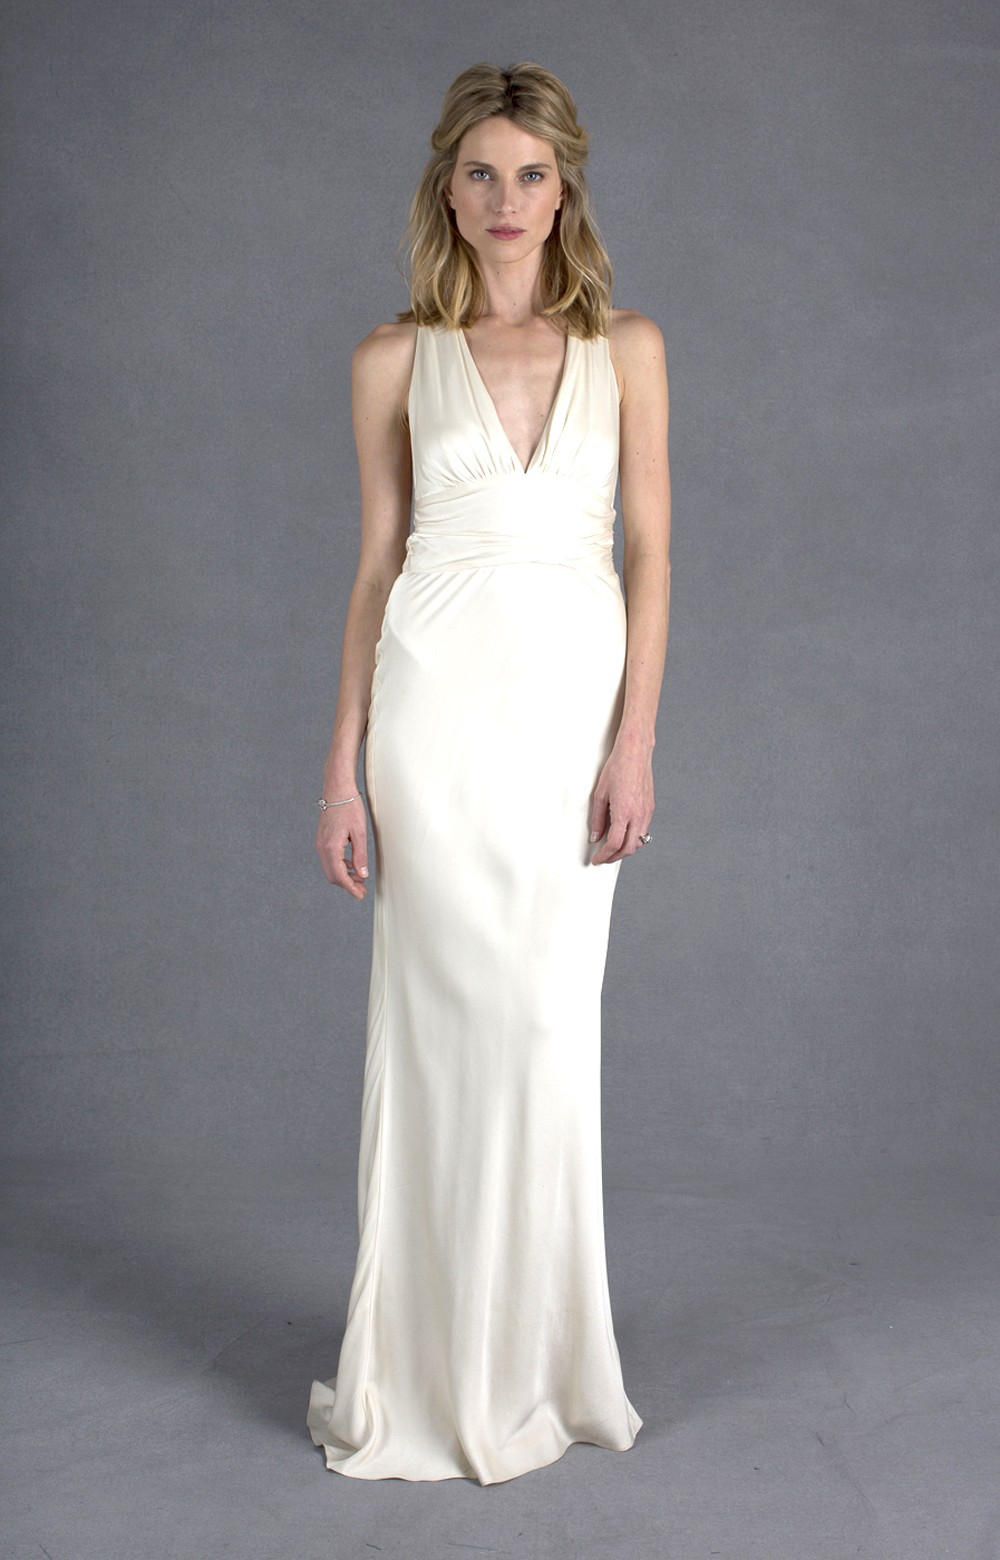 Lyst - Nicole miller Lia Bridal Gown in White